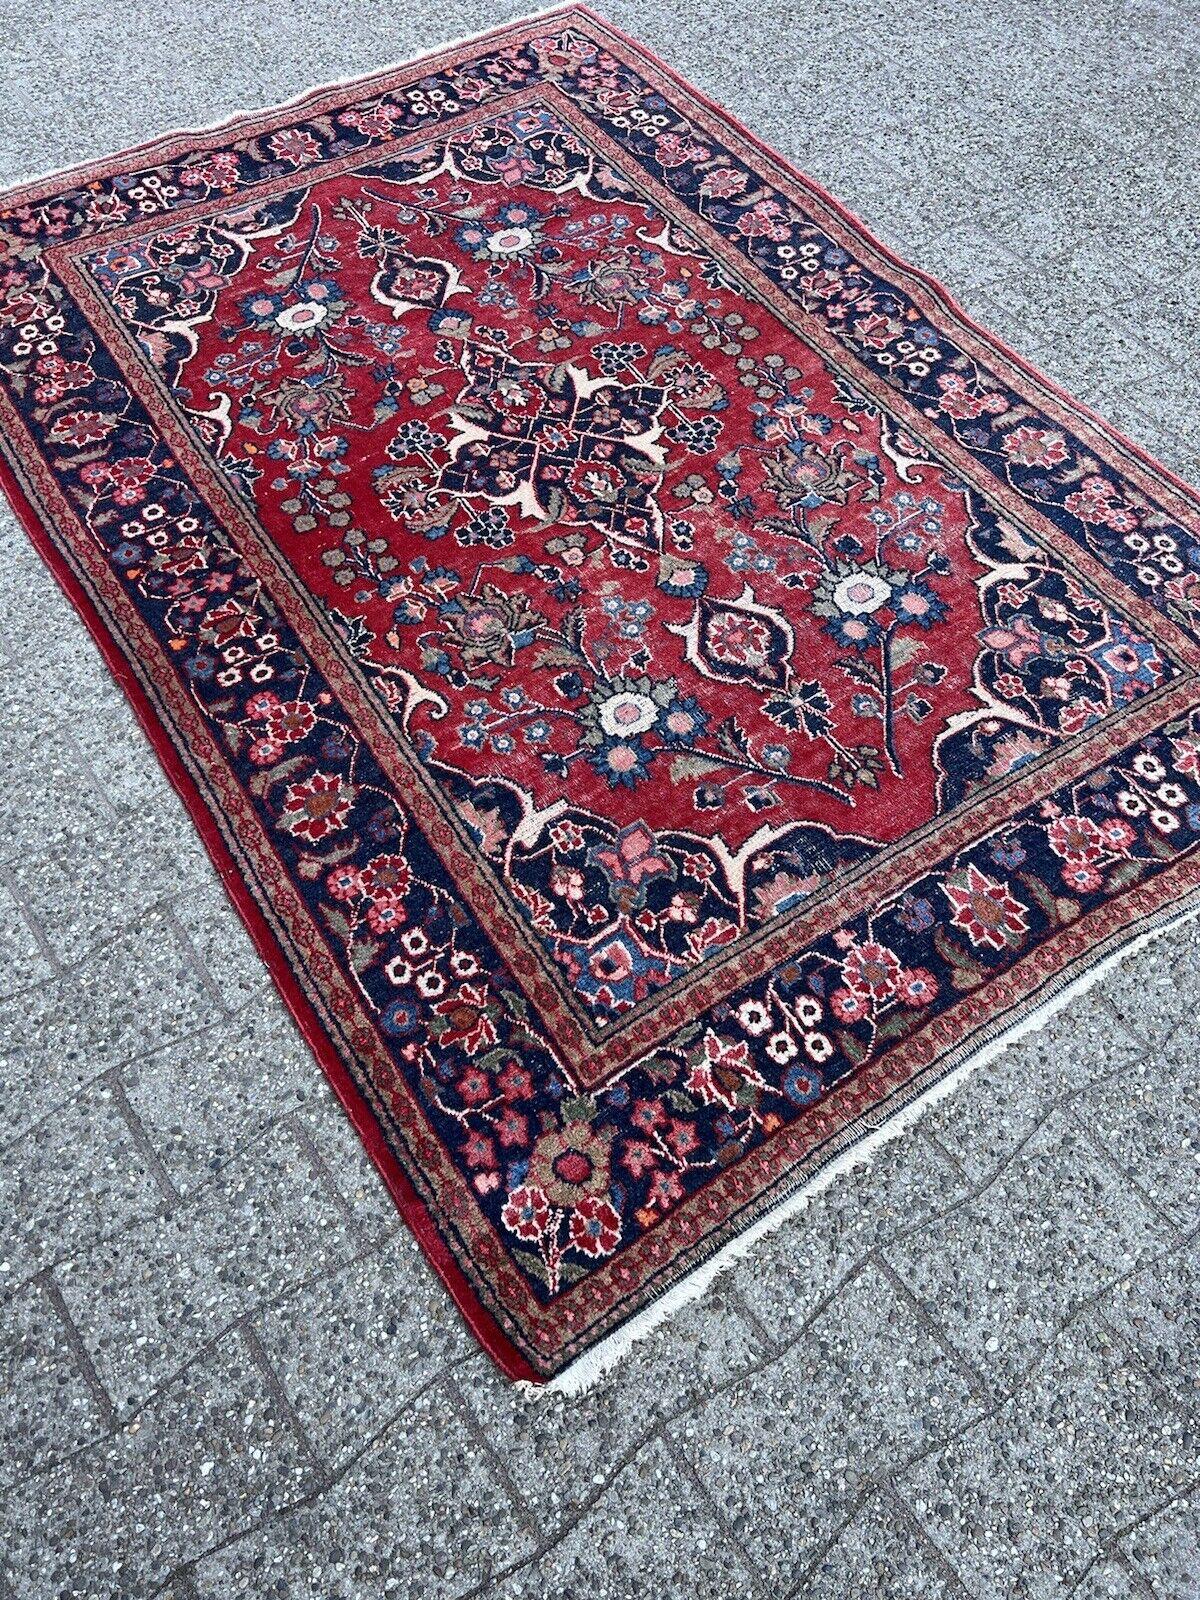 Immerse yourself in the rich history of Persian rug-making with this Handmade Antique Persian Style Kashan Rug. Dating back to the 1920s, this rug measures 4.4’ x 6.5’ (136cm x 200cm) and is a remarkable relic from a bygone era.

The rug is